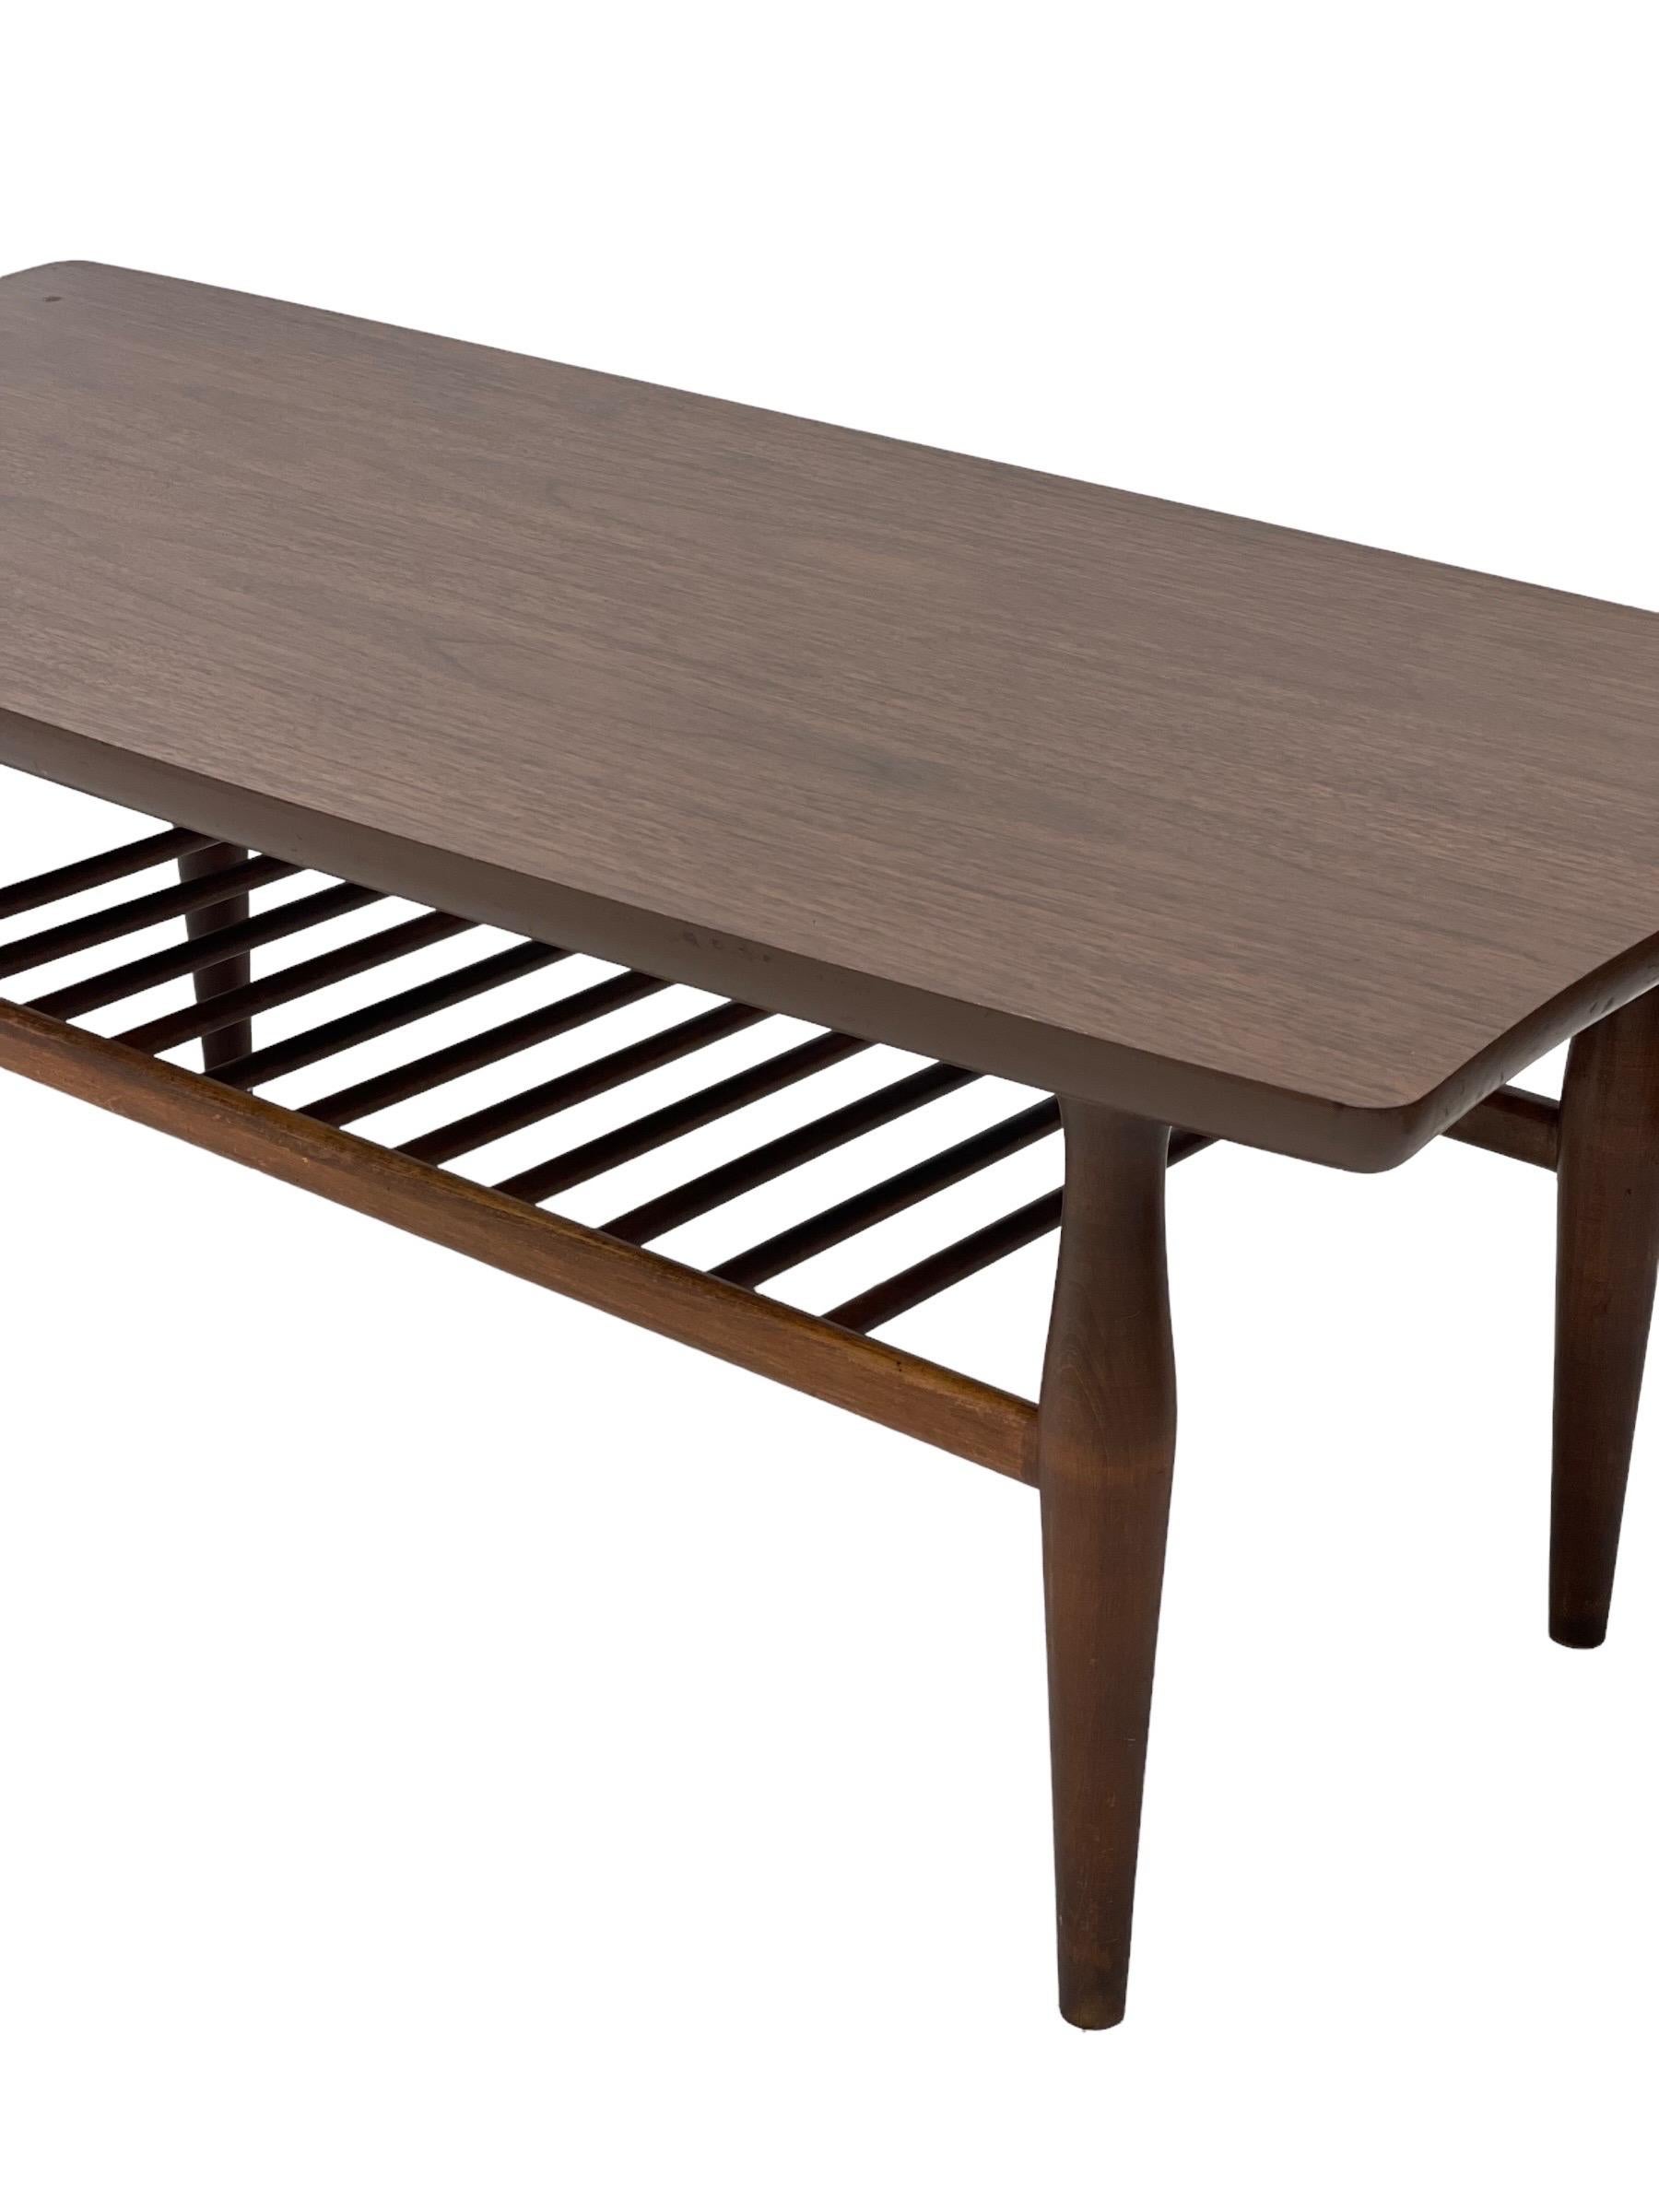 Vintage Mid-Century Modern Walnut Coffee Table with Shelf For Sale 3